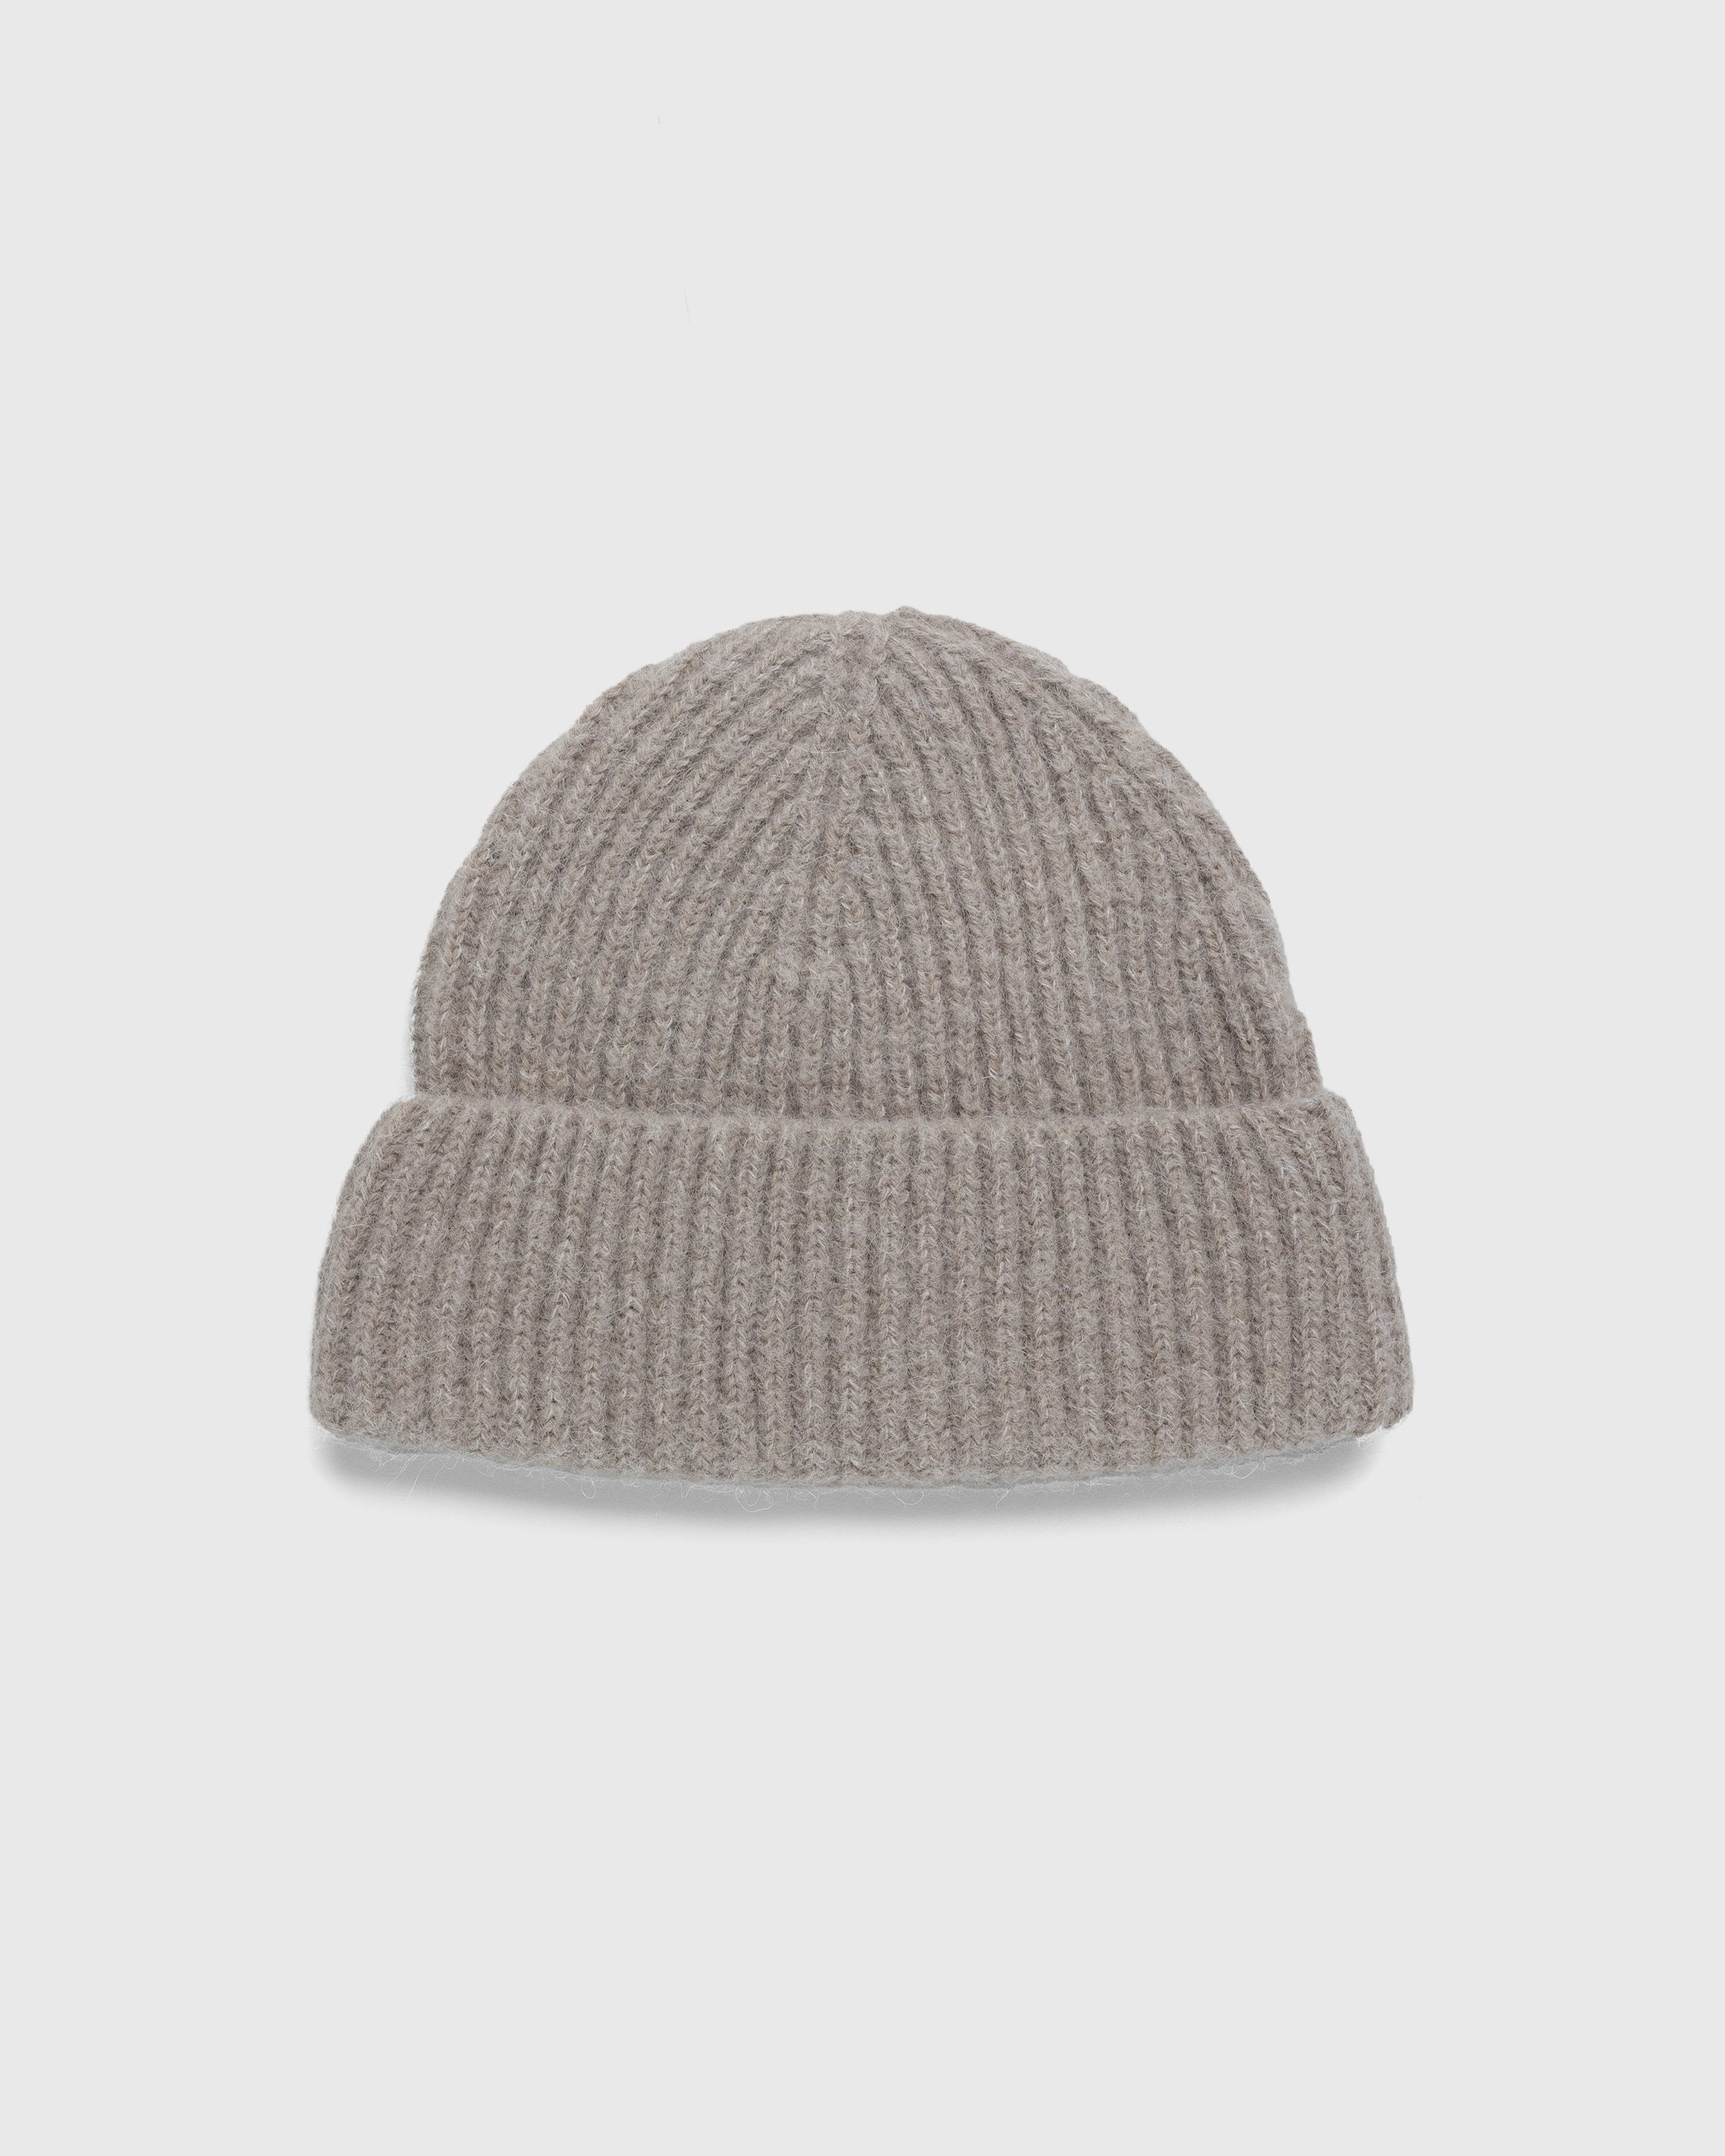 Our Legacy - Knit Hat Beige - Accessories - Beige - Image 1